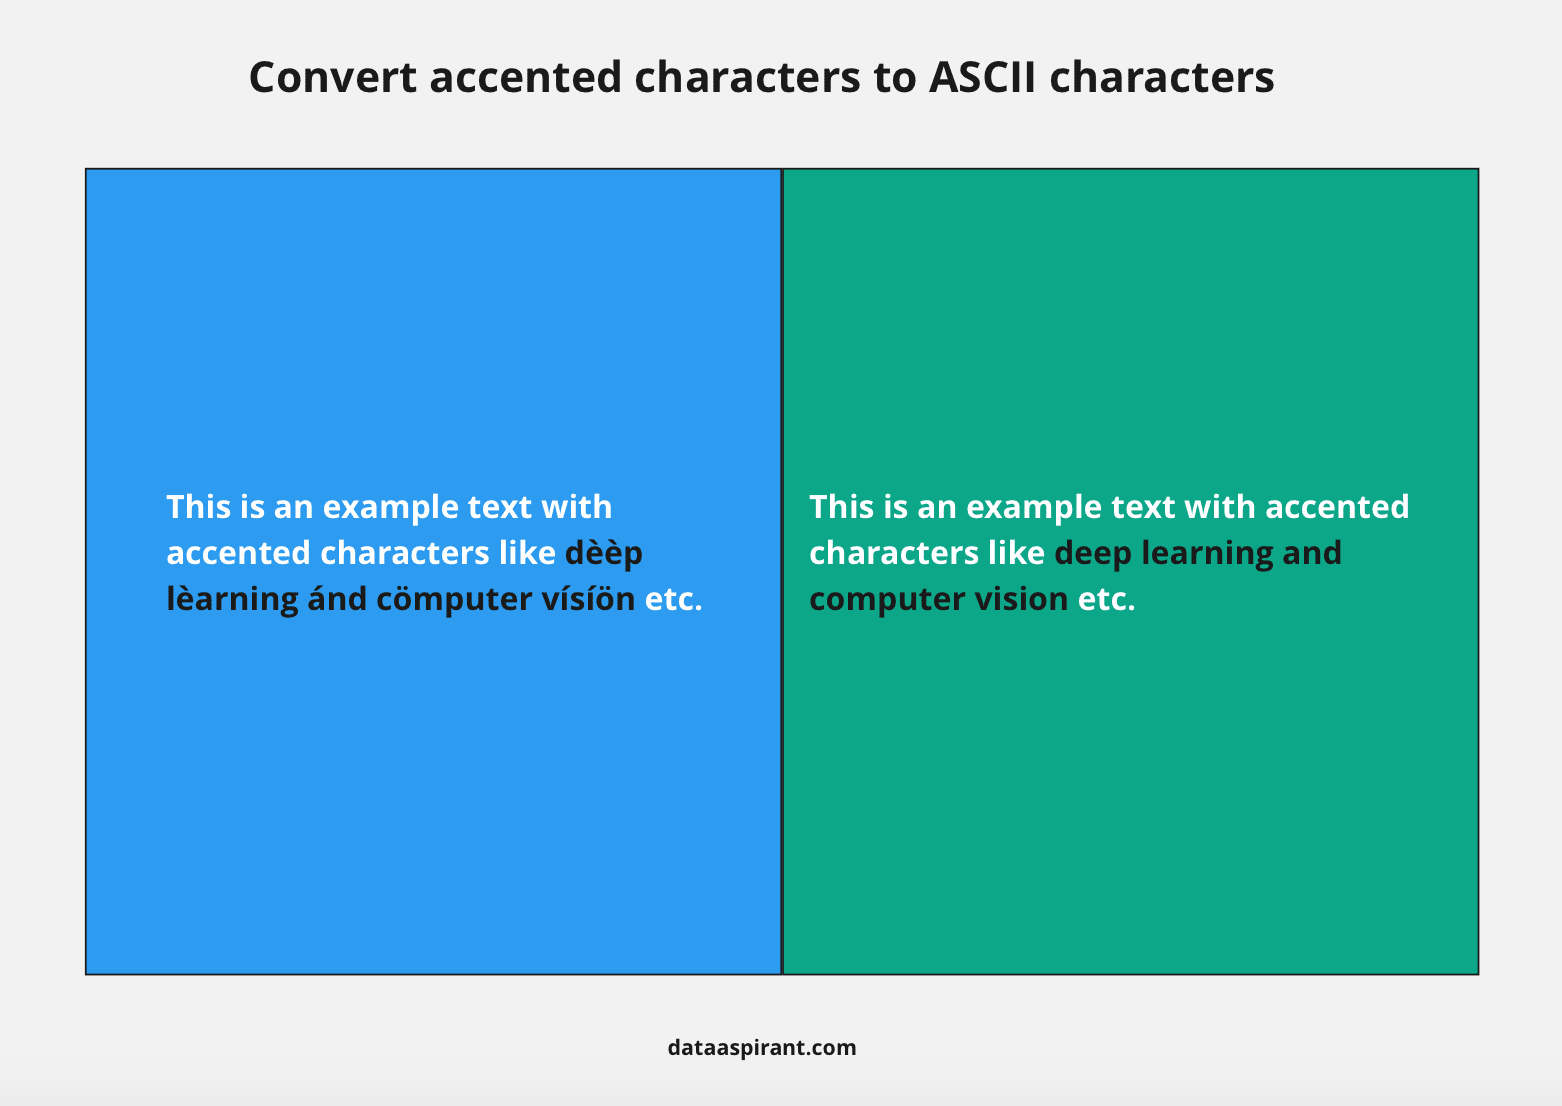 Convert accented characters to ASCII